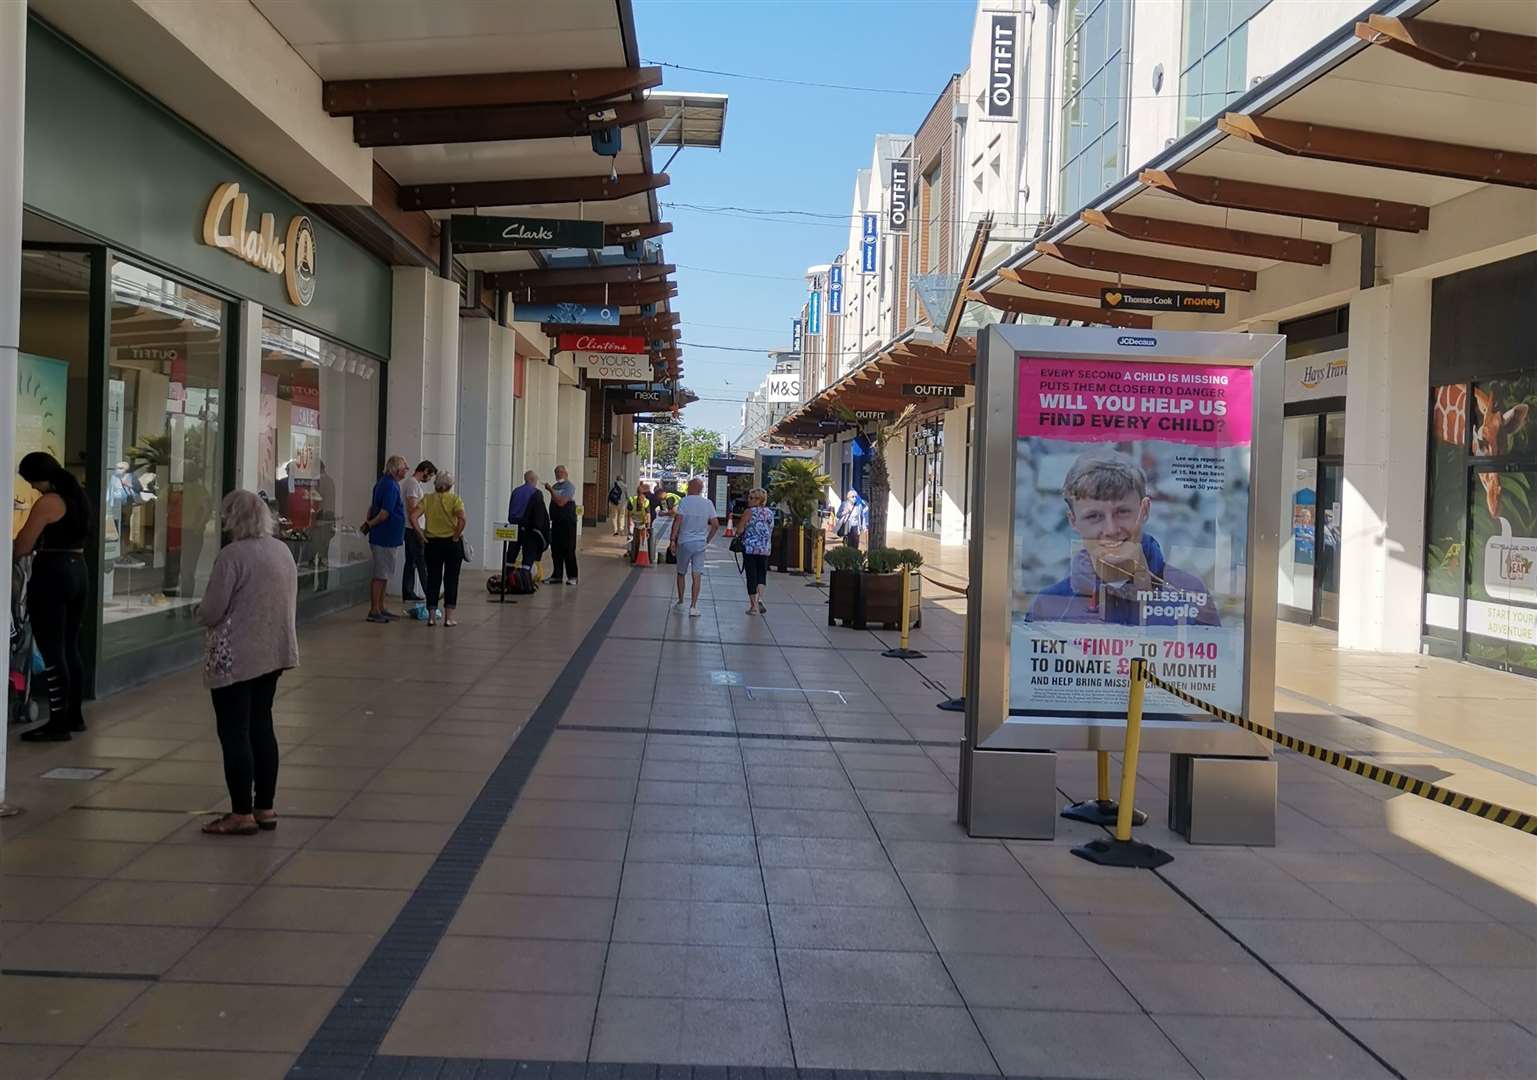 Westwood Cross shopping centre in Broadstairs